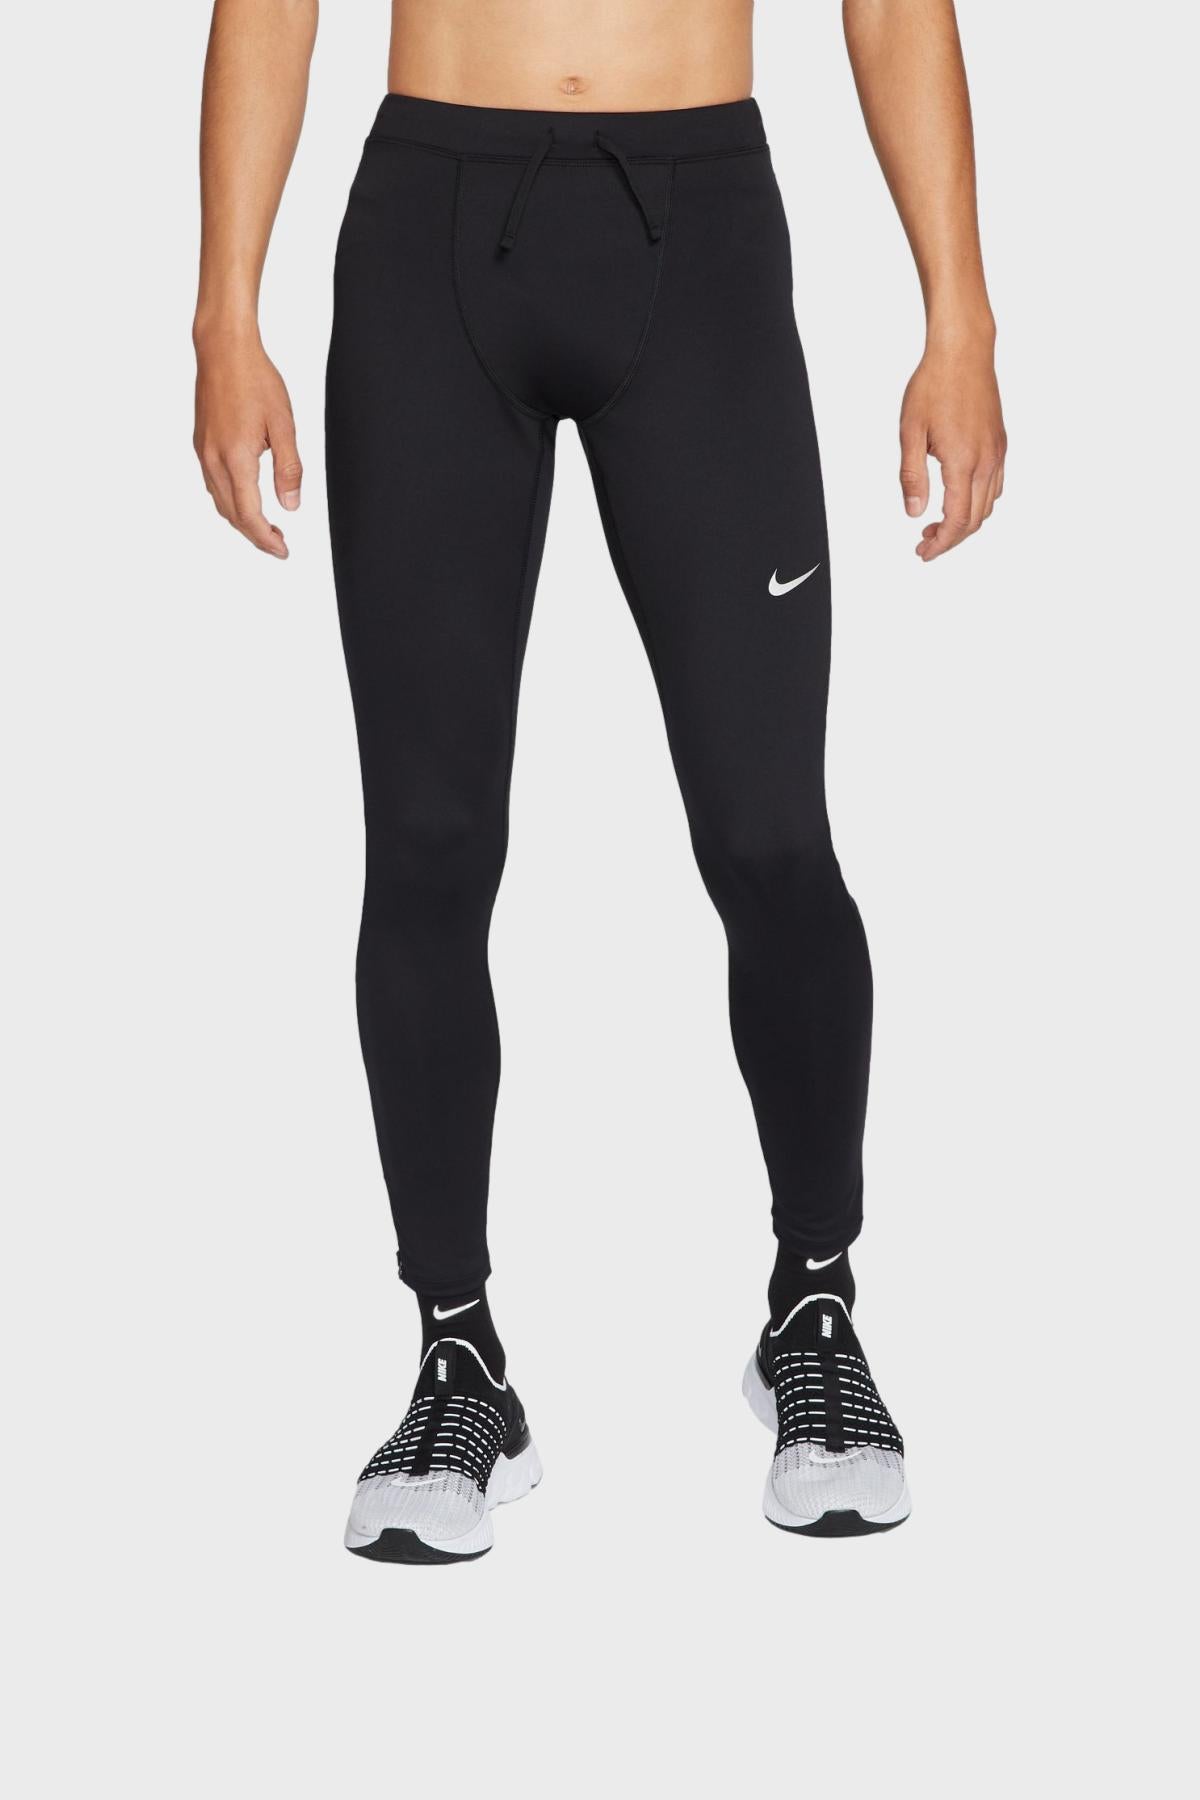 Nike - Challenger Tight